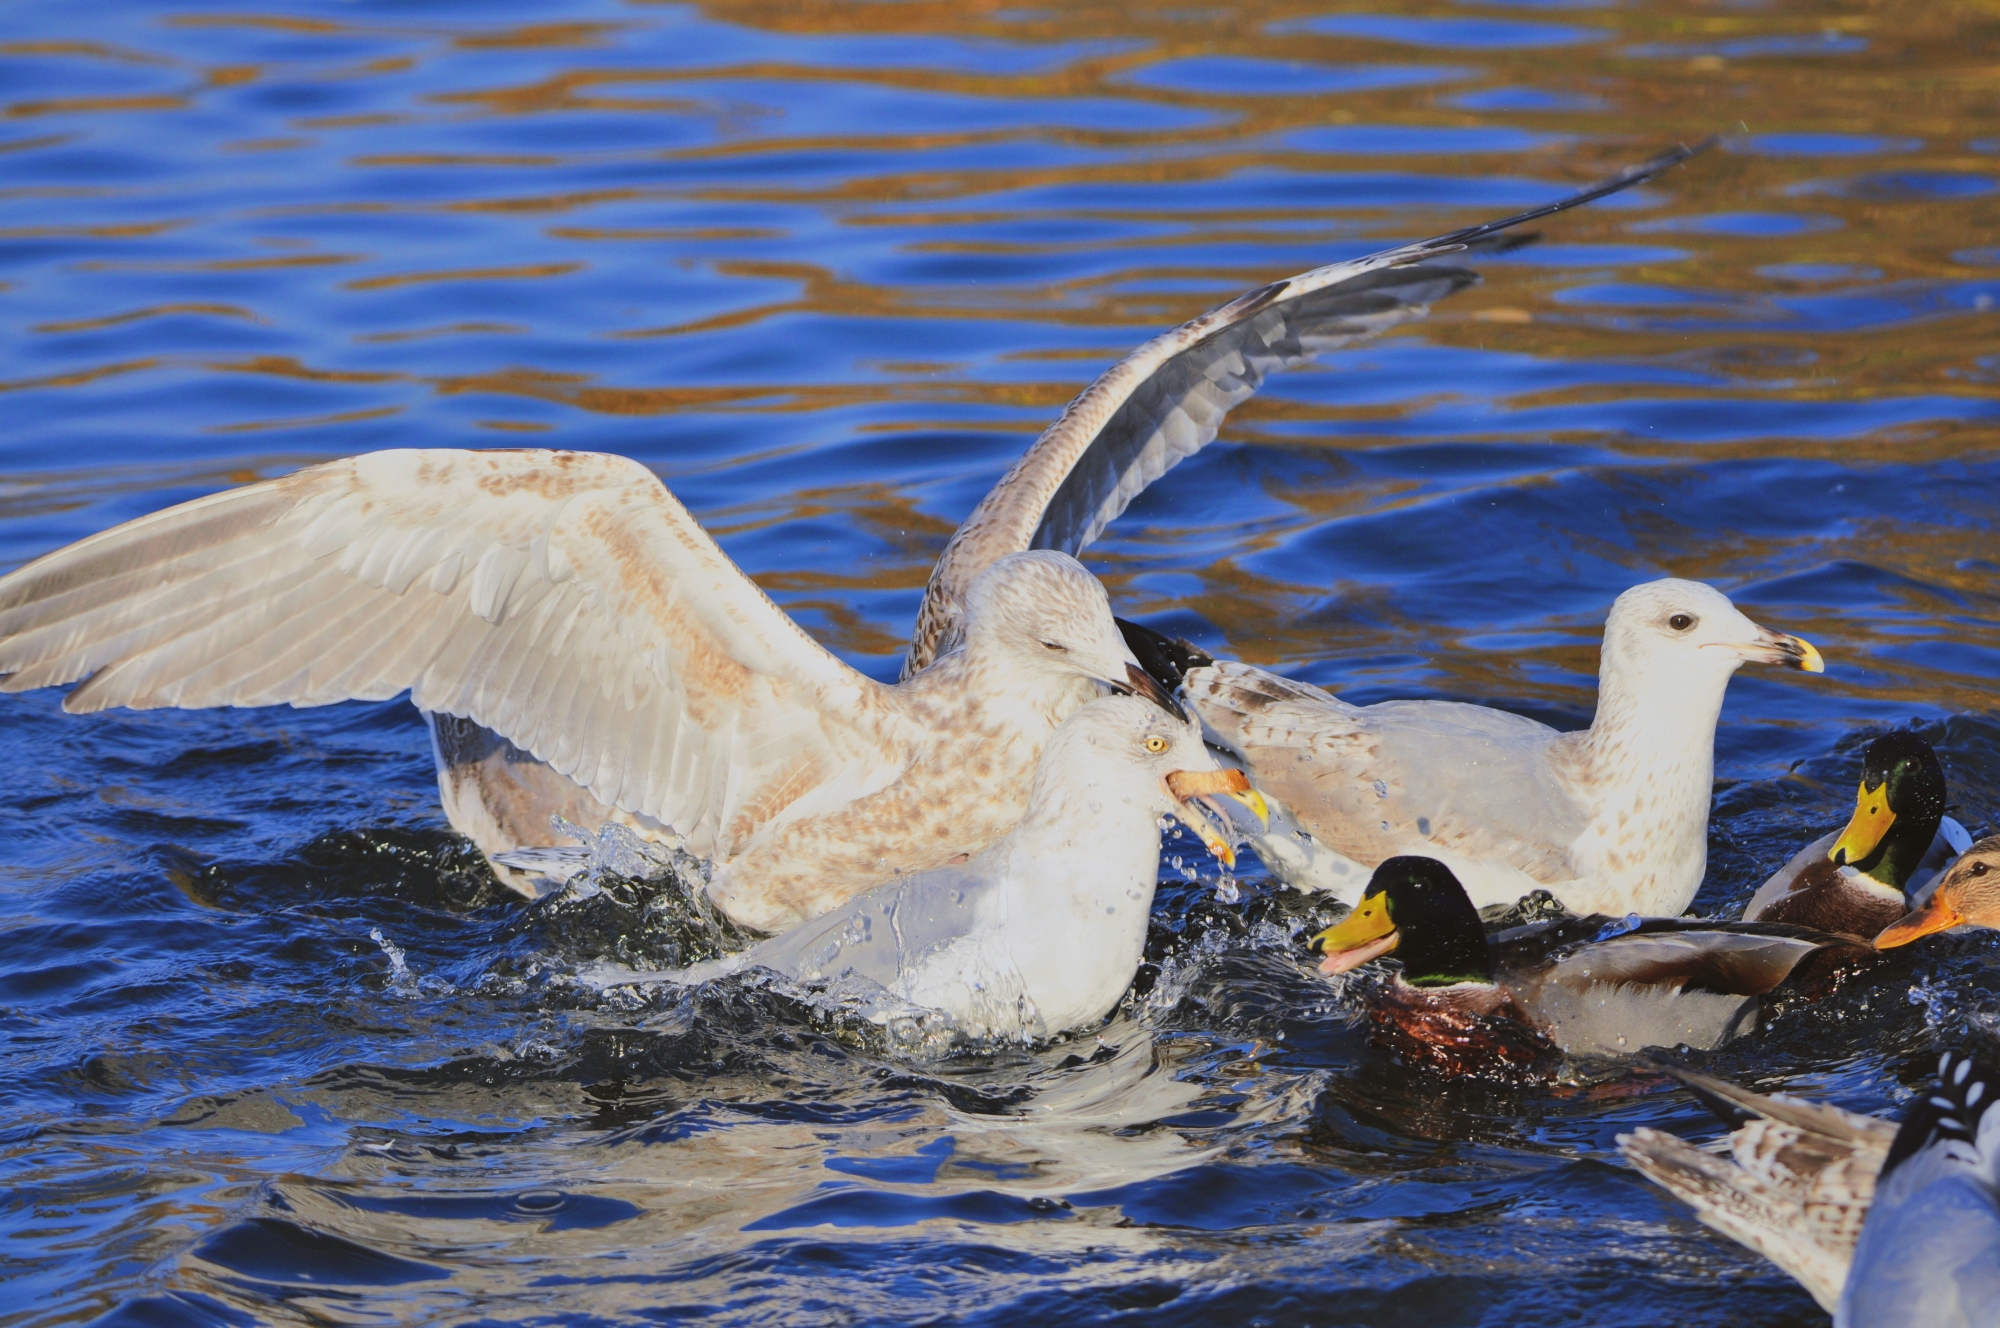 A large gull bites the head of a smaller gull as a mallard looks on in a race for food